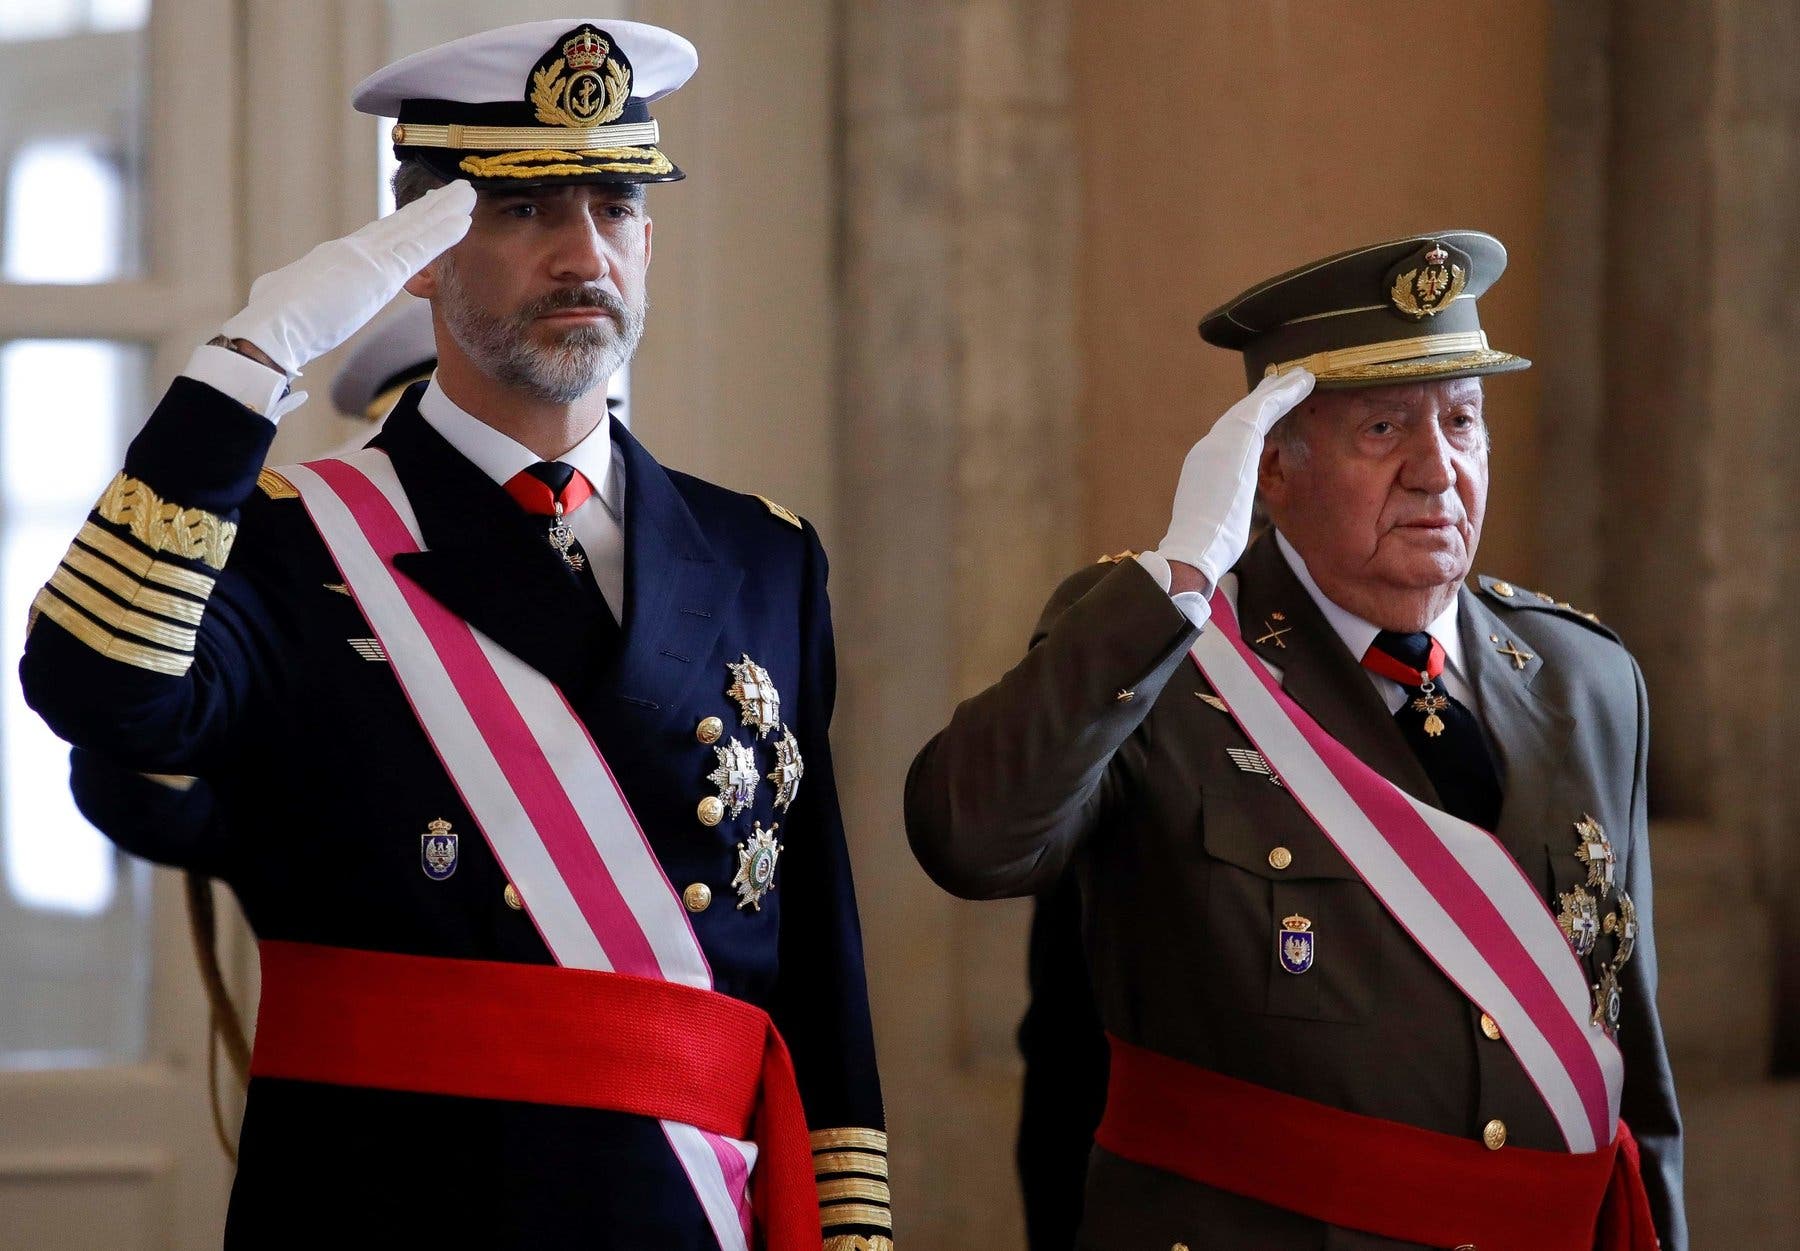 Spain’s King Distances Self from Father amid Scandal Tied to Saudi Arabia